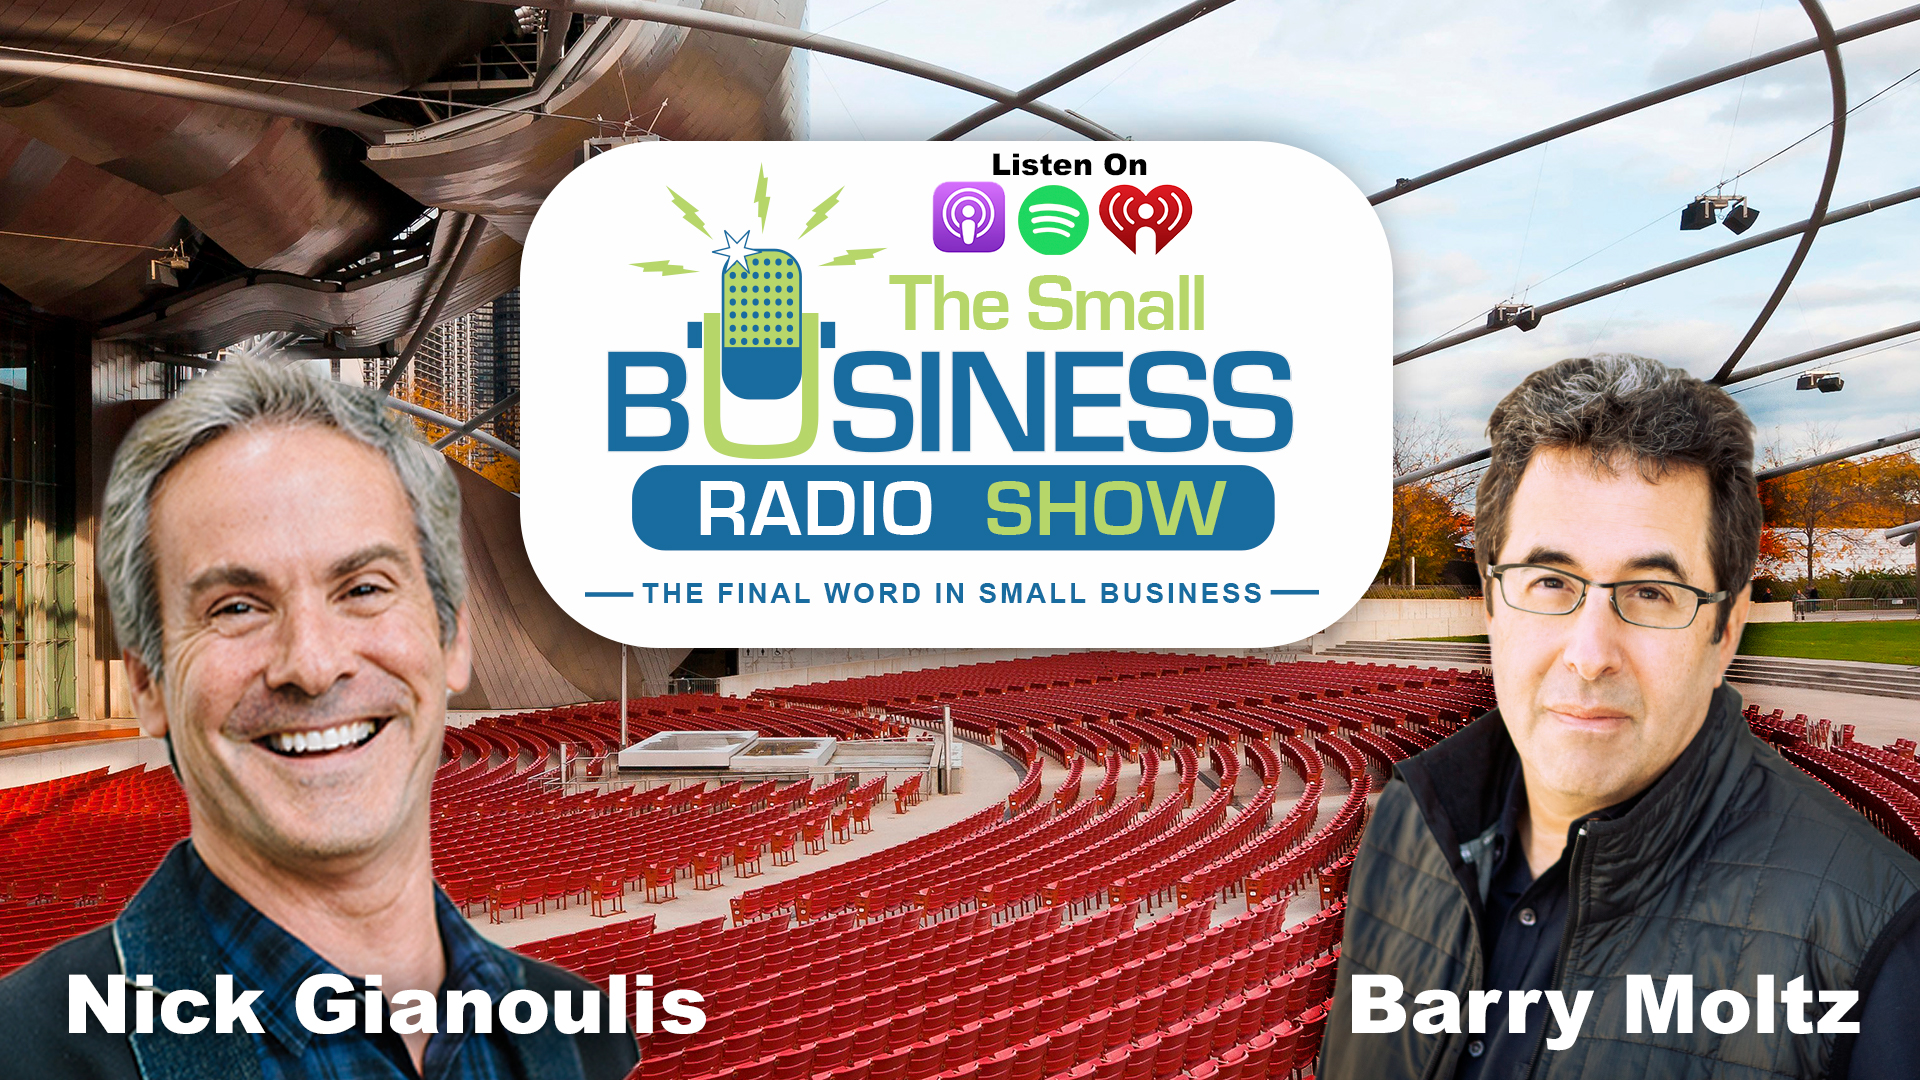 Nick Gianoulis on The Small Business Radio Show